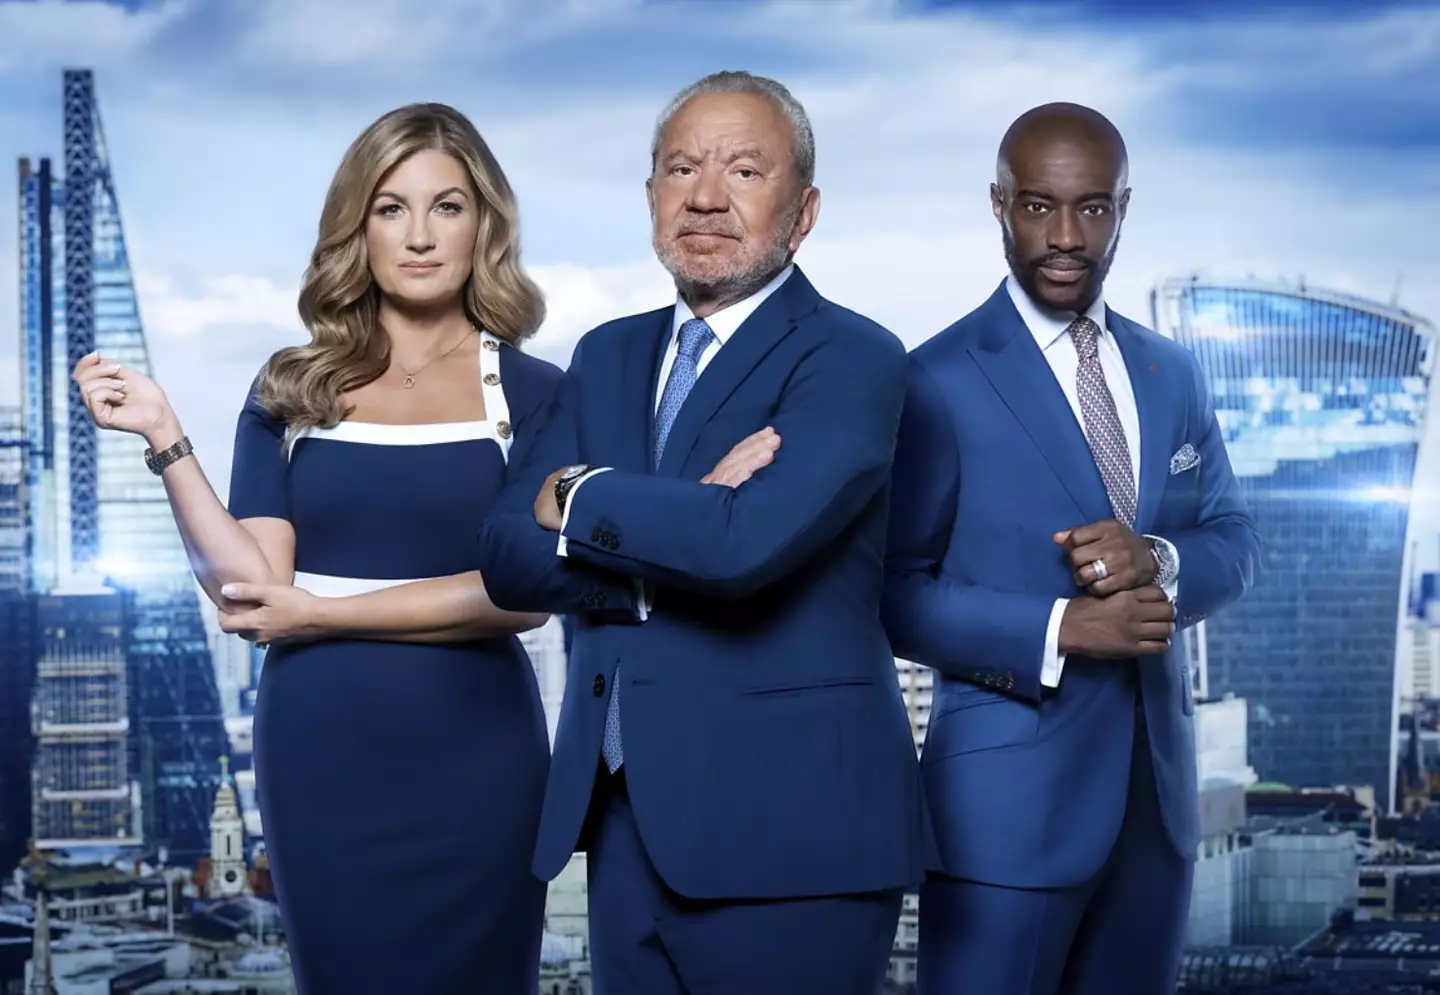 The Apprentice has been on telly since 2005.